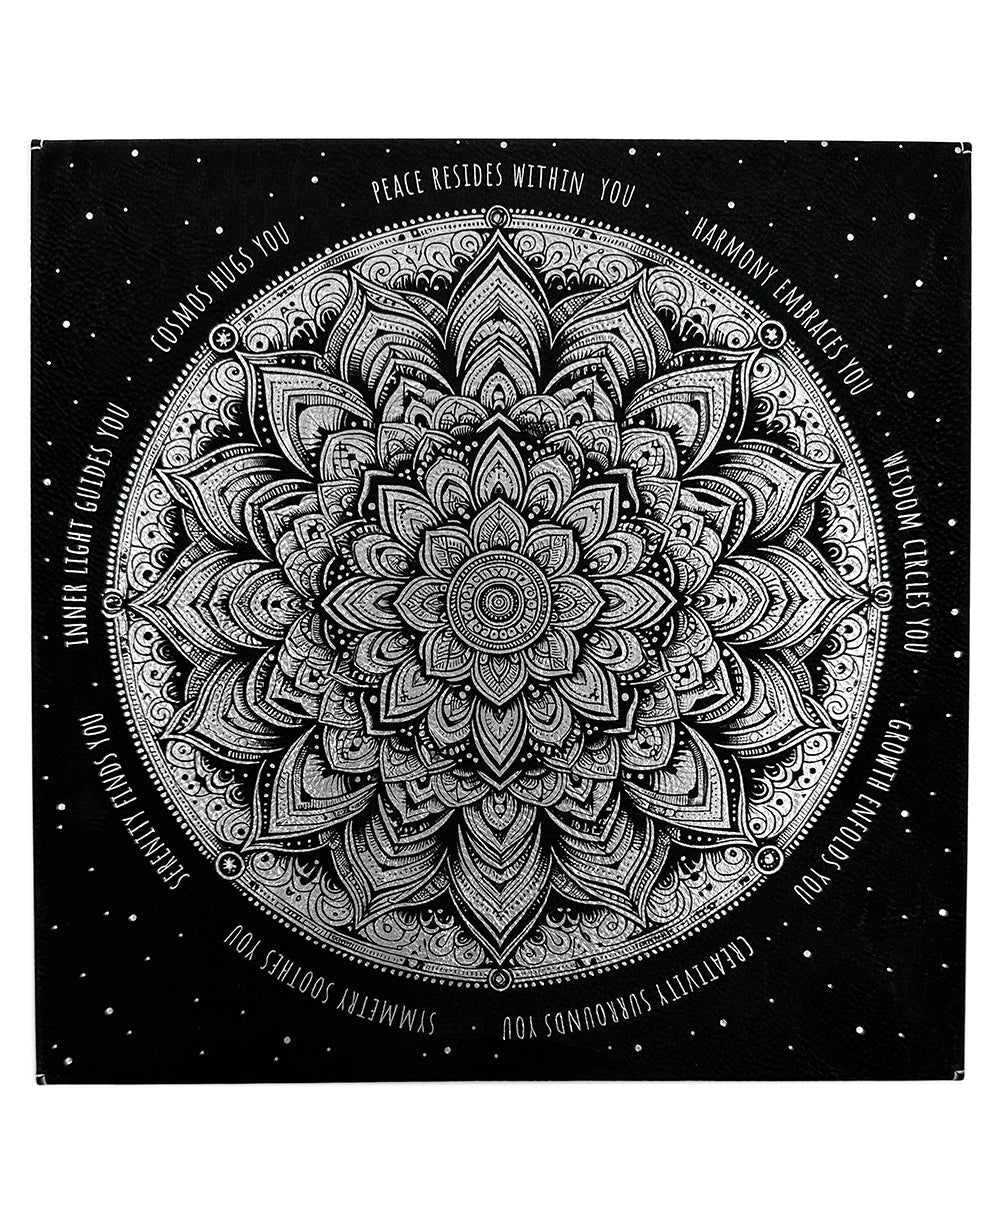 Inspirational Mandala Wall Art in Black and Silver - Wind Chimes